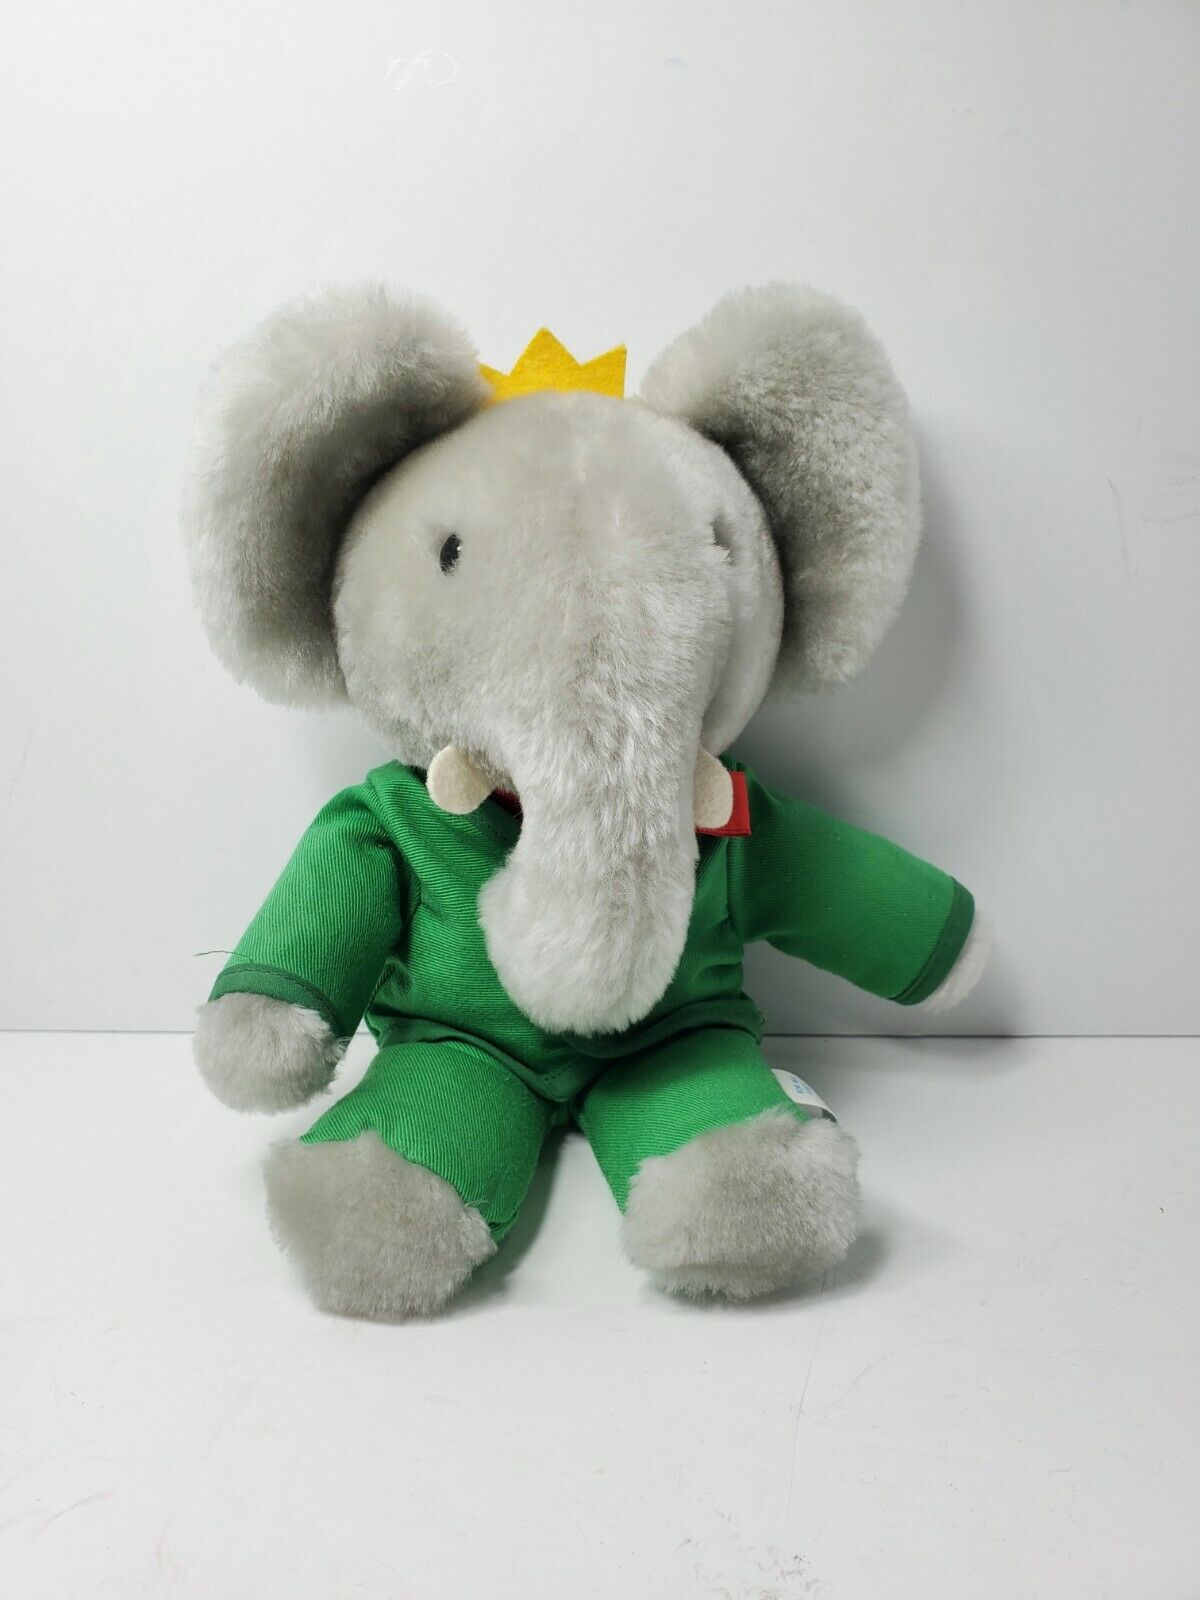 Vintage Eden Babar The Elephant Plush Toy 1977 Clean Nice!! Adult Owned